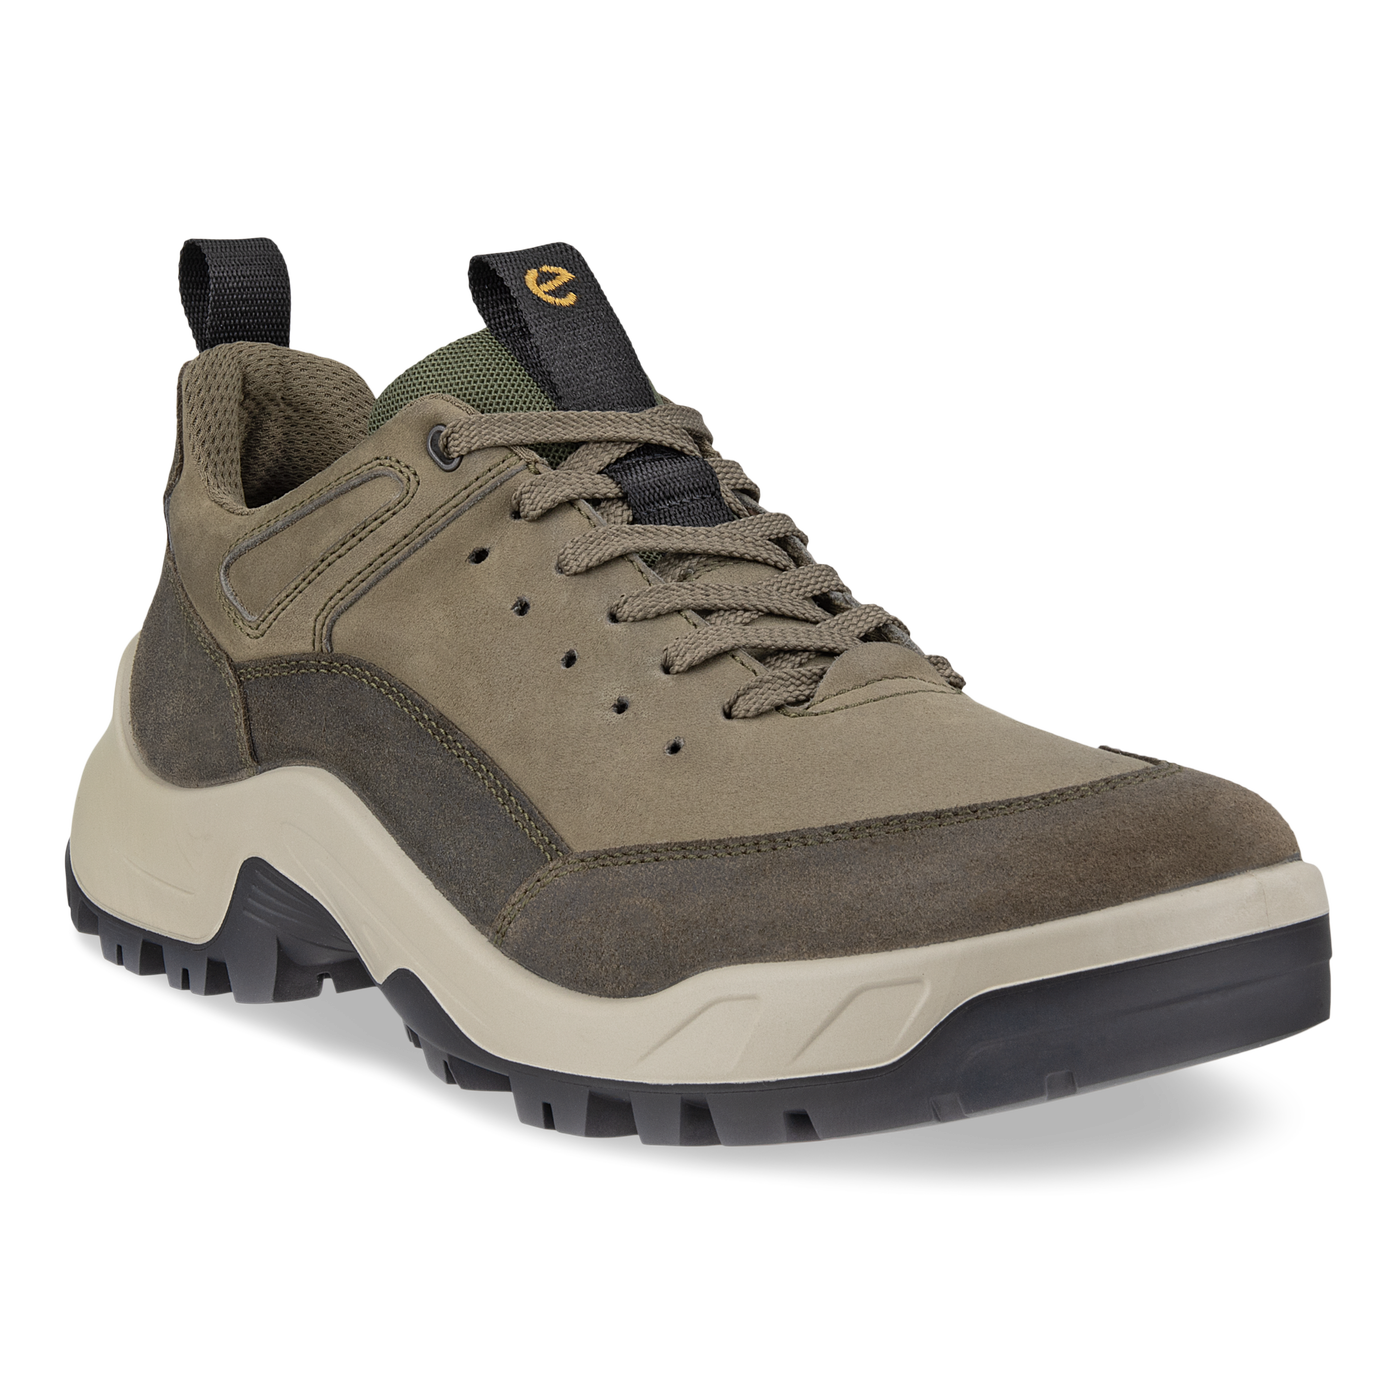 ECCO Offroad Lace Up Shoe in Tarmac